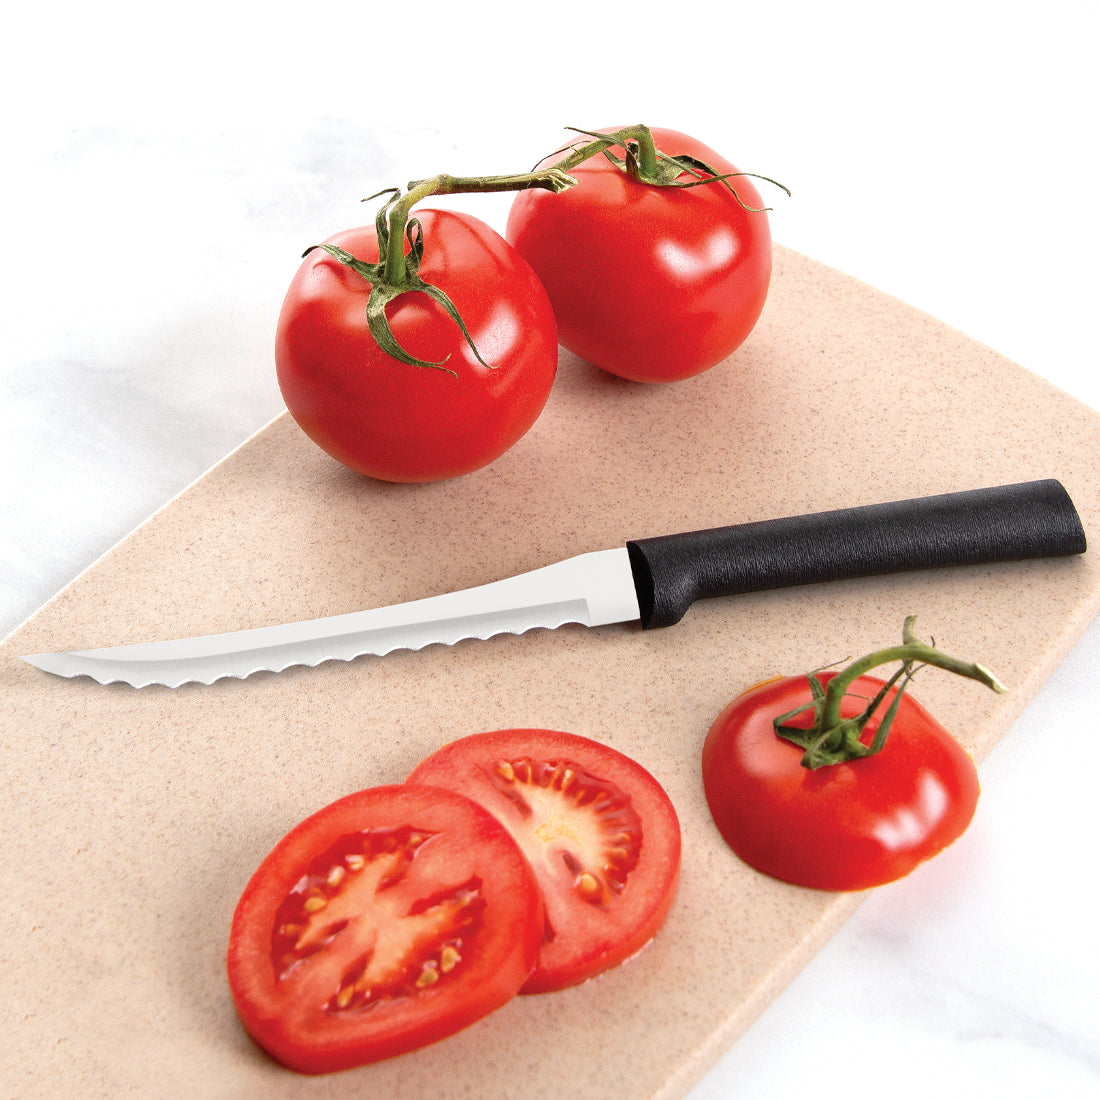 Handy Housewares 10 Serrated Stainless Steel Blade Tomato Slicing Knife  Set - 2 Pack